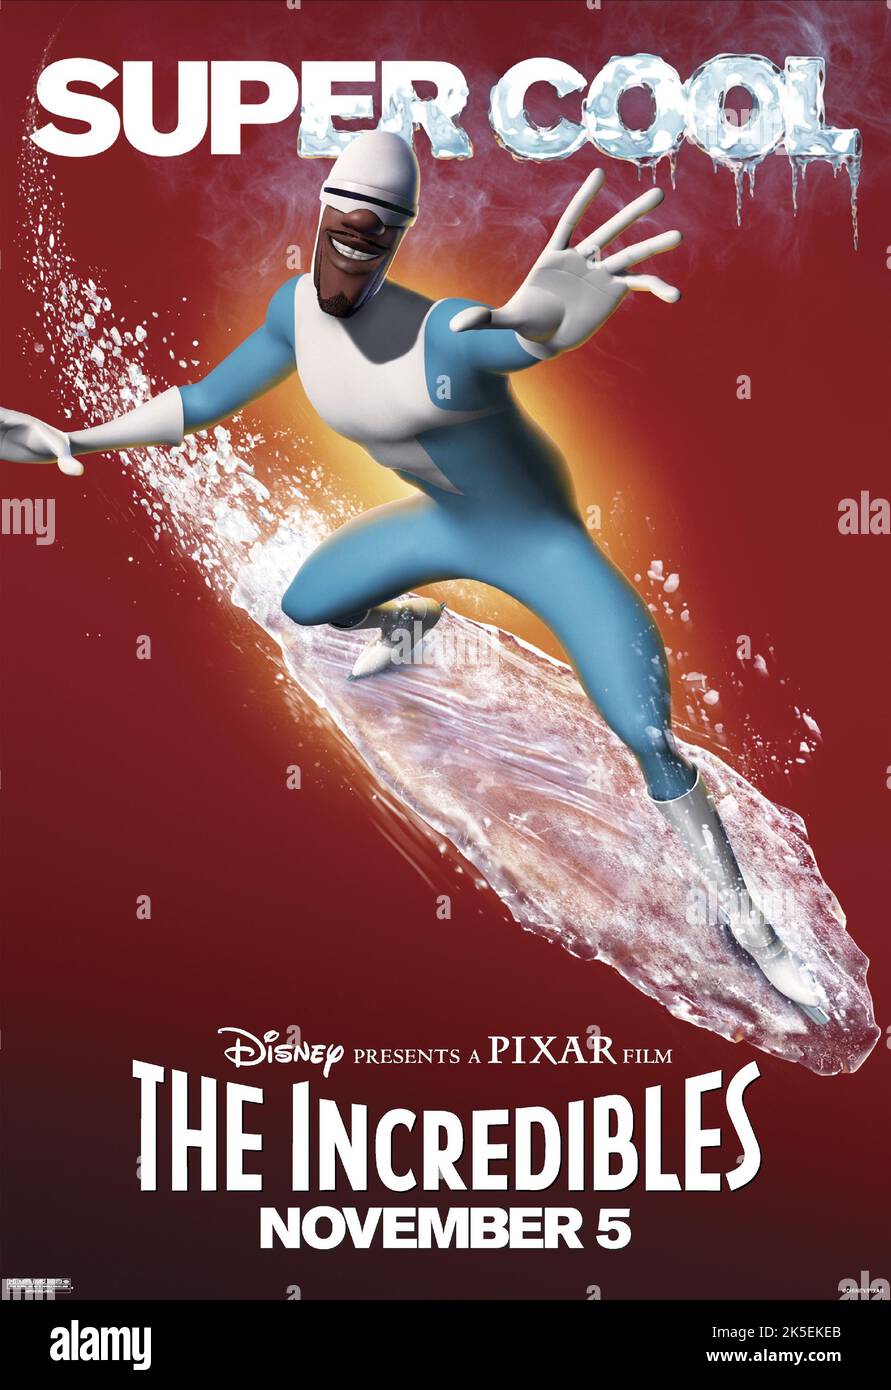 LUCIUS BEST AKA FROZONE, THE INCREDIBLES, 2004 Stock Photo